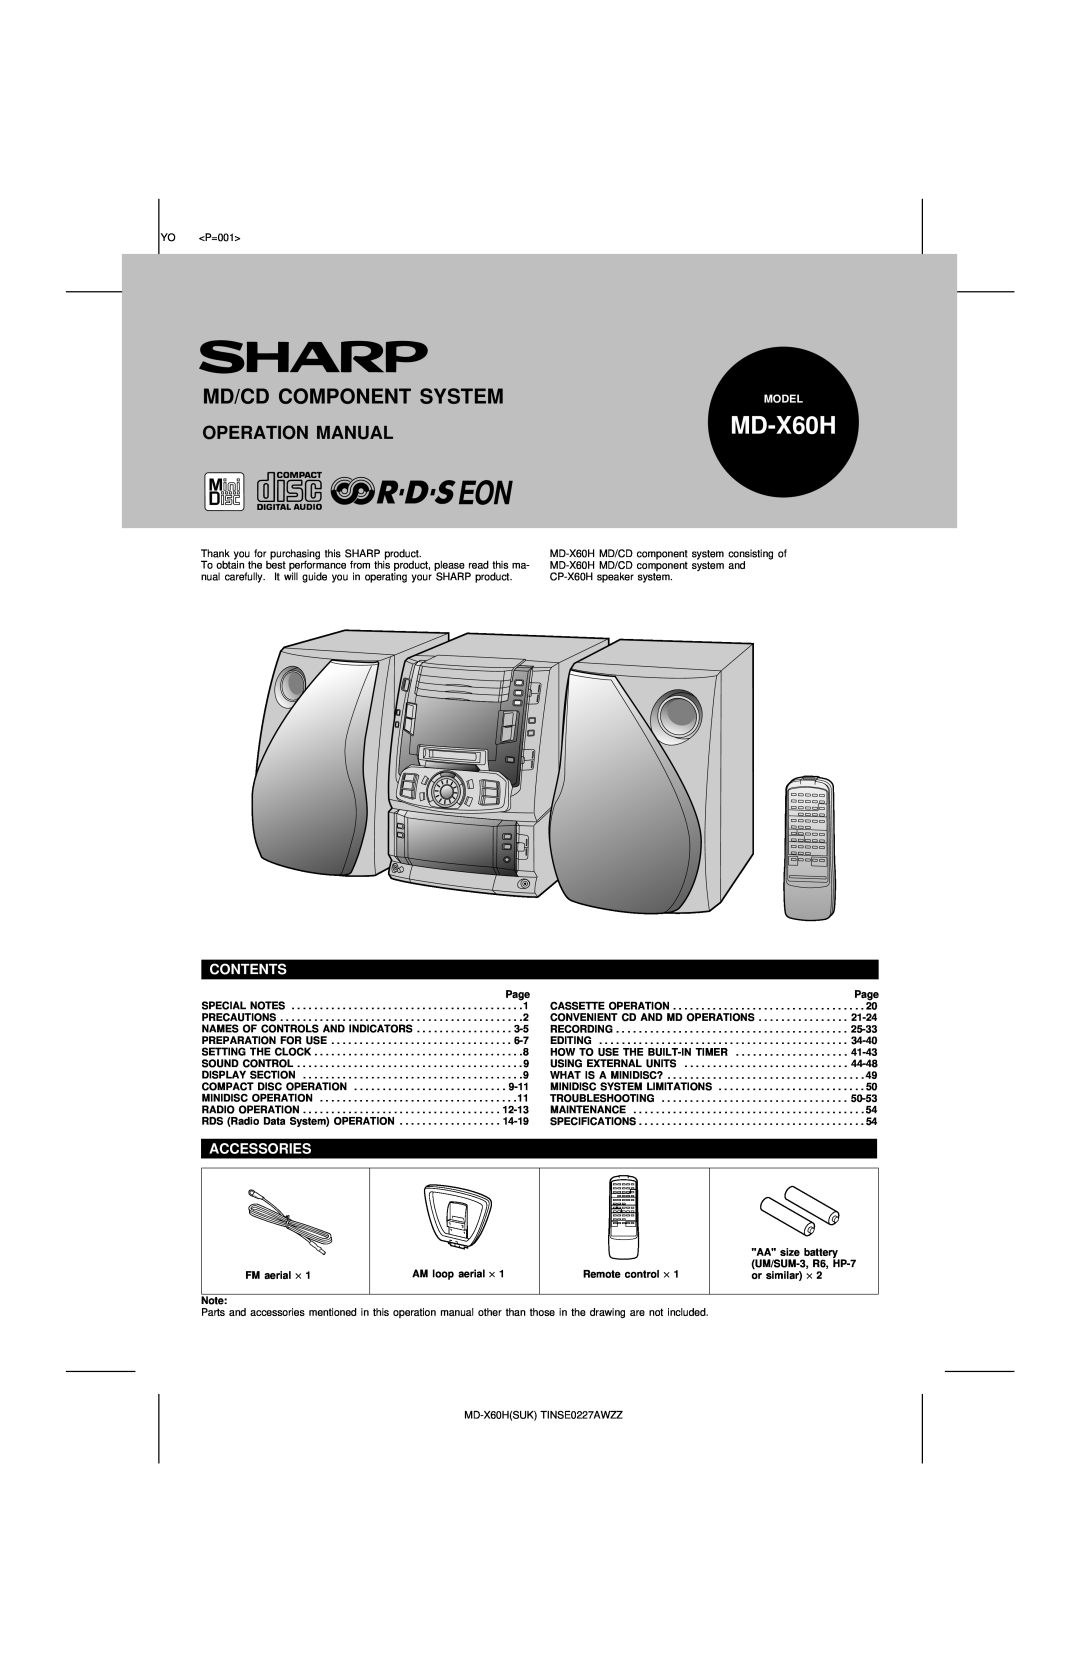 Sharp MD-X60H operation manual Contents, Accessories, Md/Cd Component System, Model 